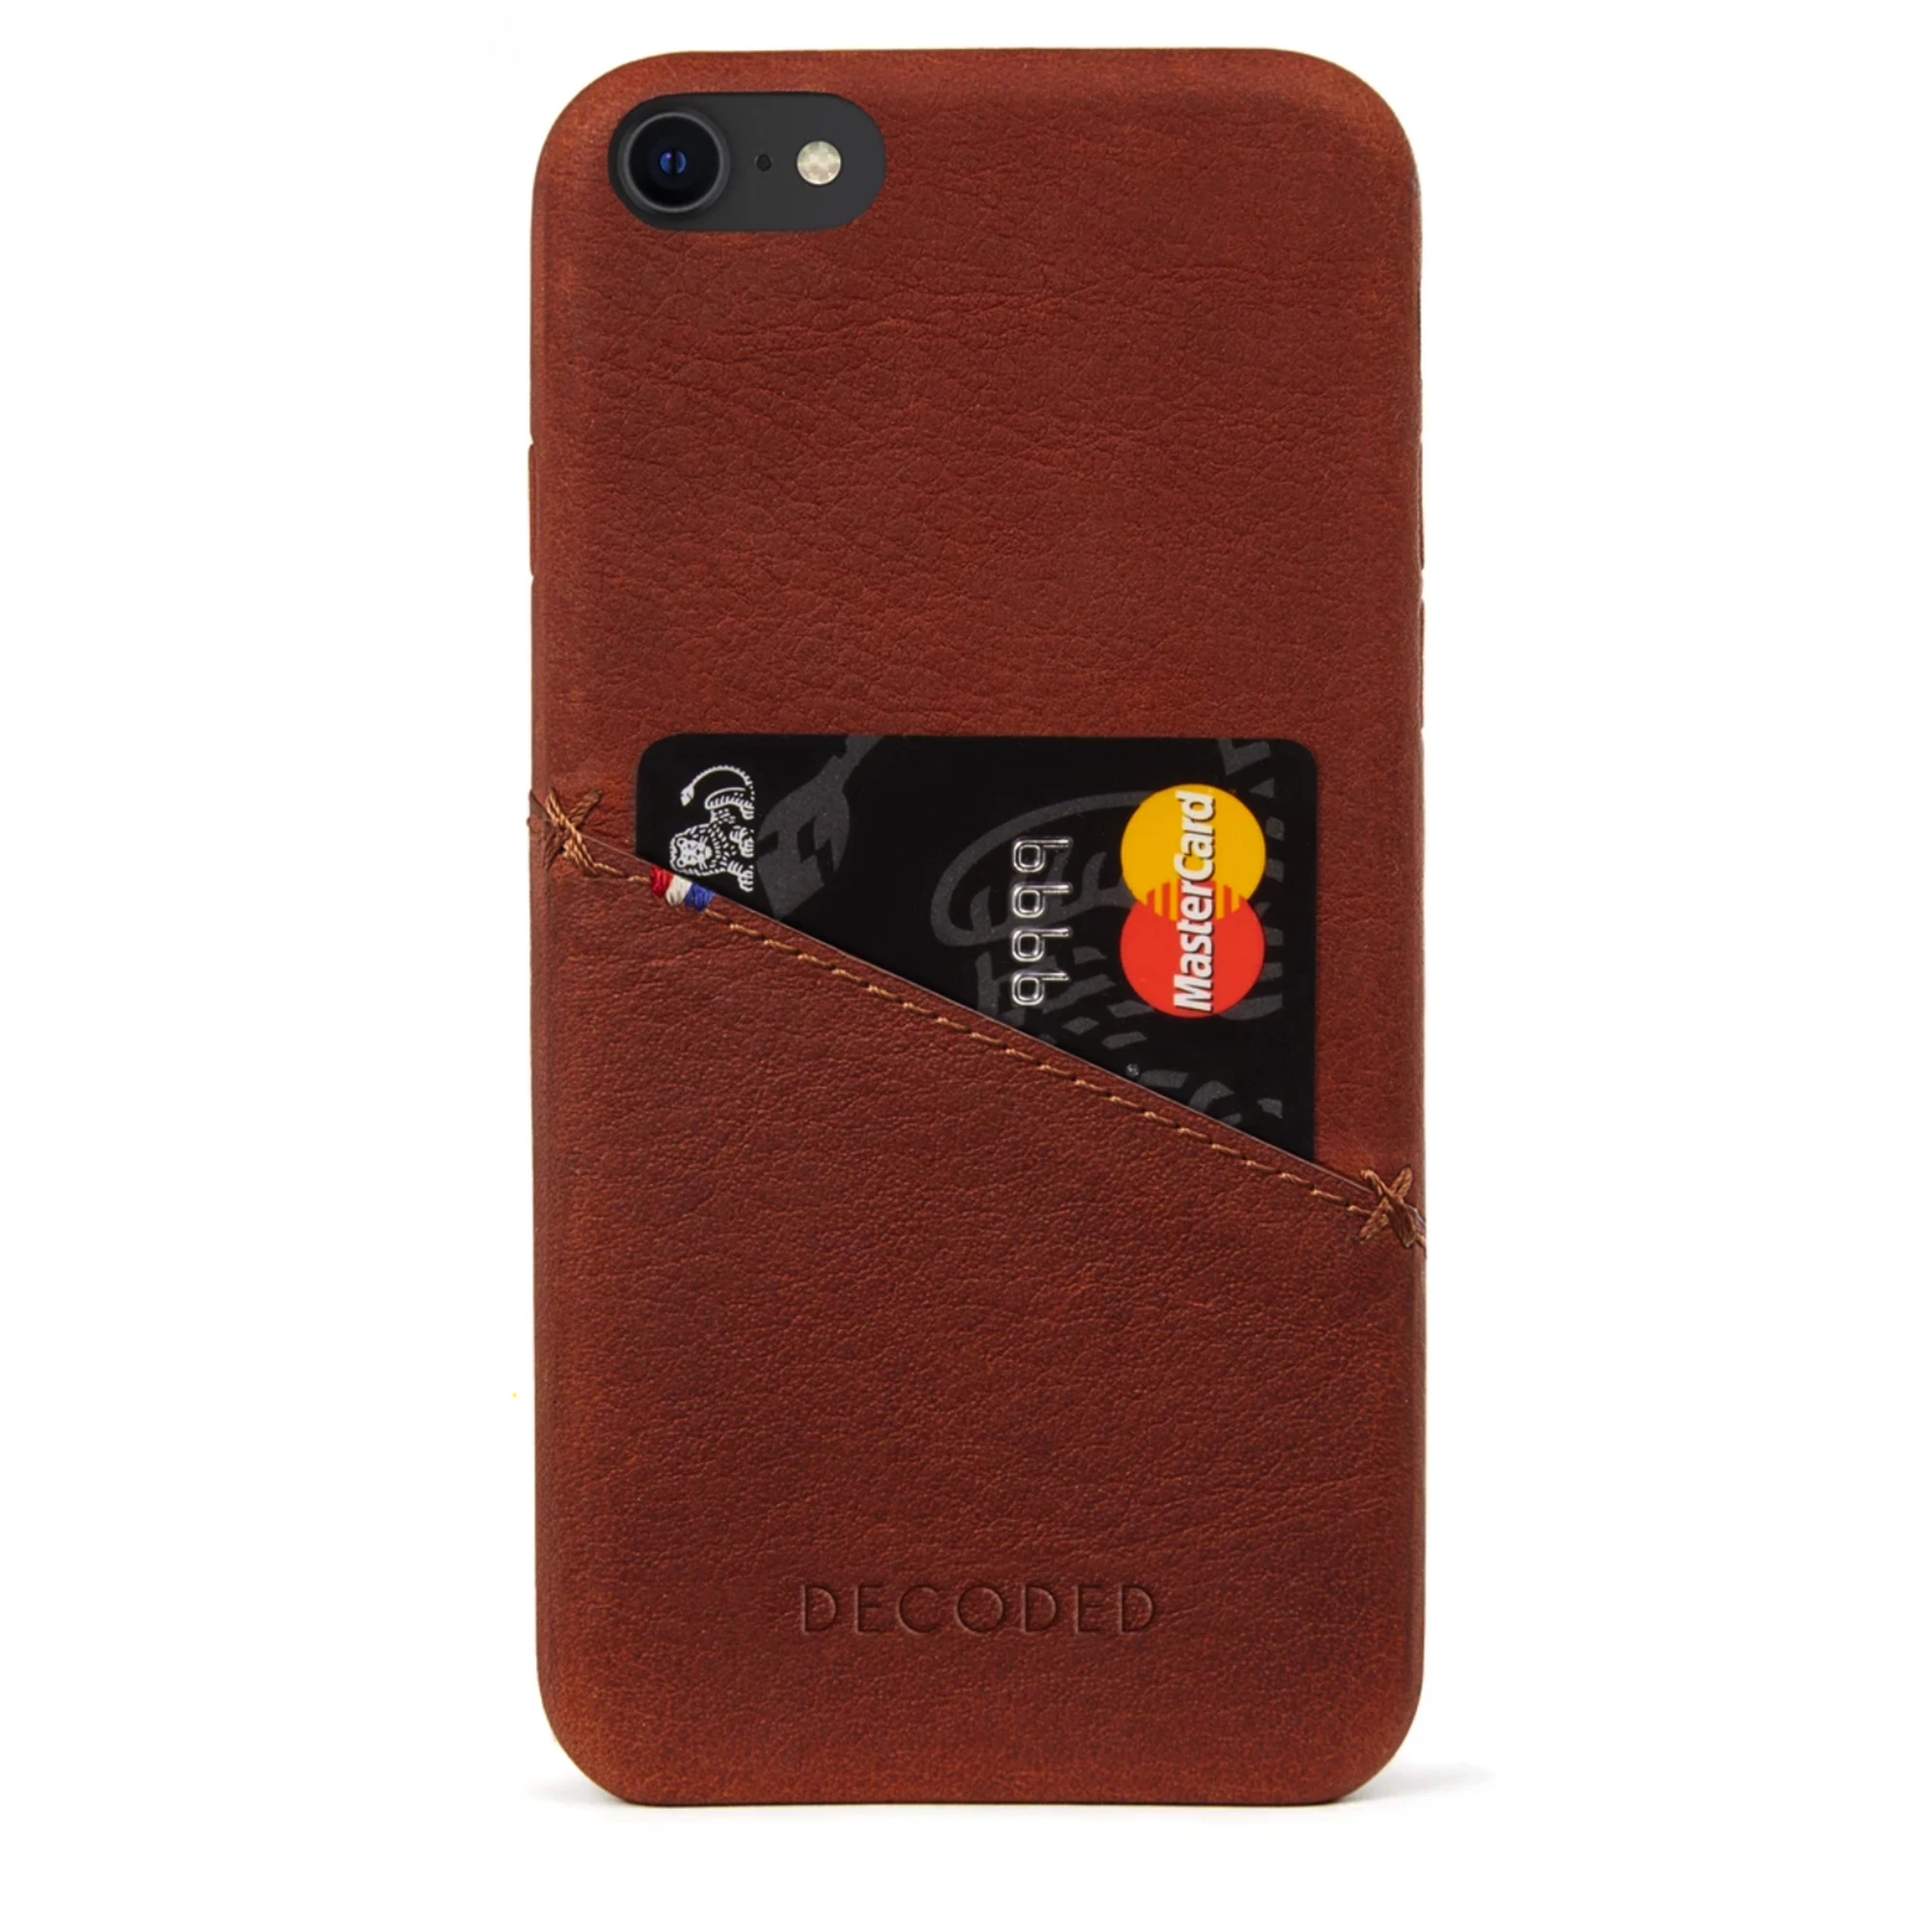 DECODED Leather Back Cover Card Case Brown for iPhone SE 2020 / iPhone 8/7 / 6s / 6 (D6IPO7BC3CBN)